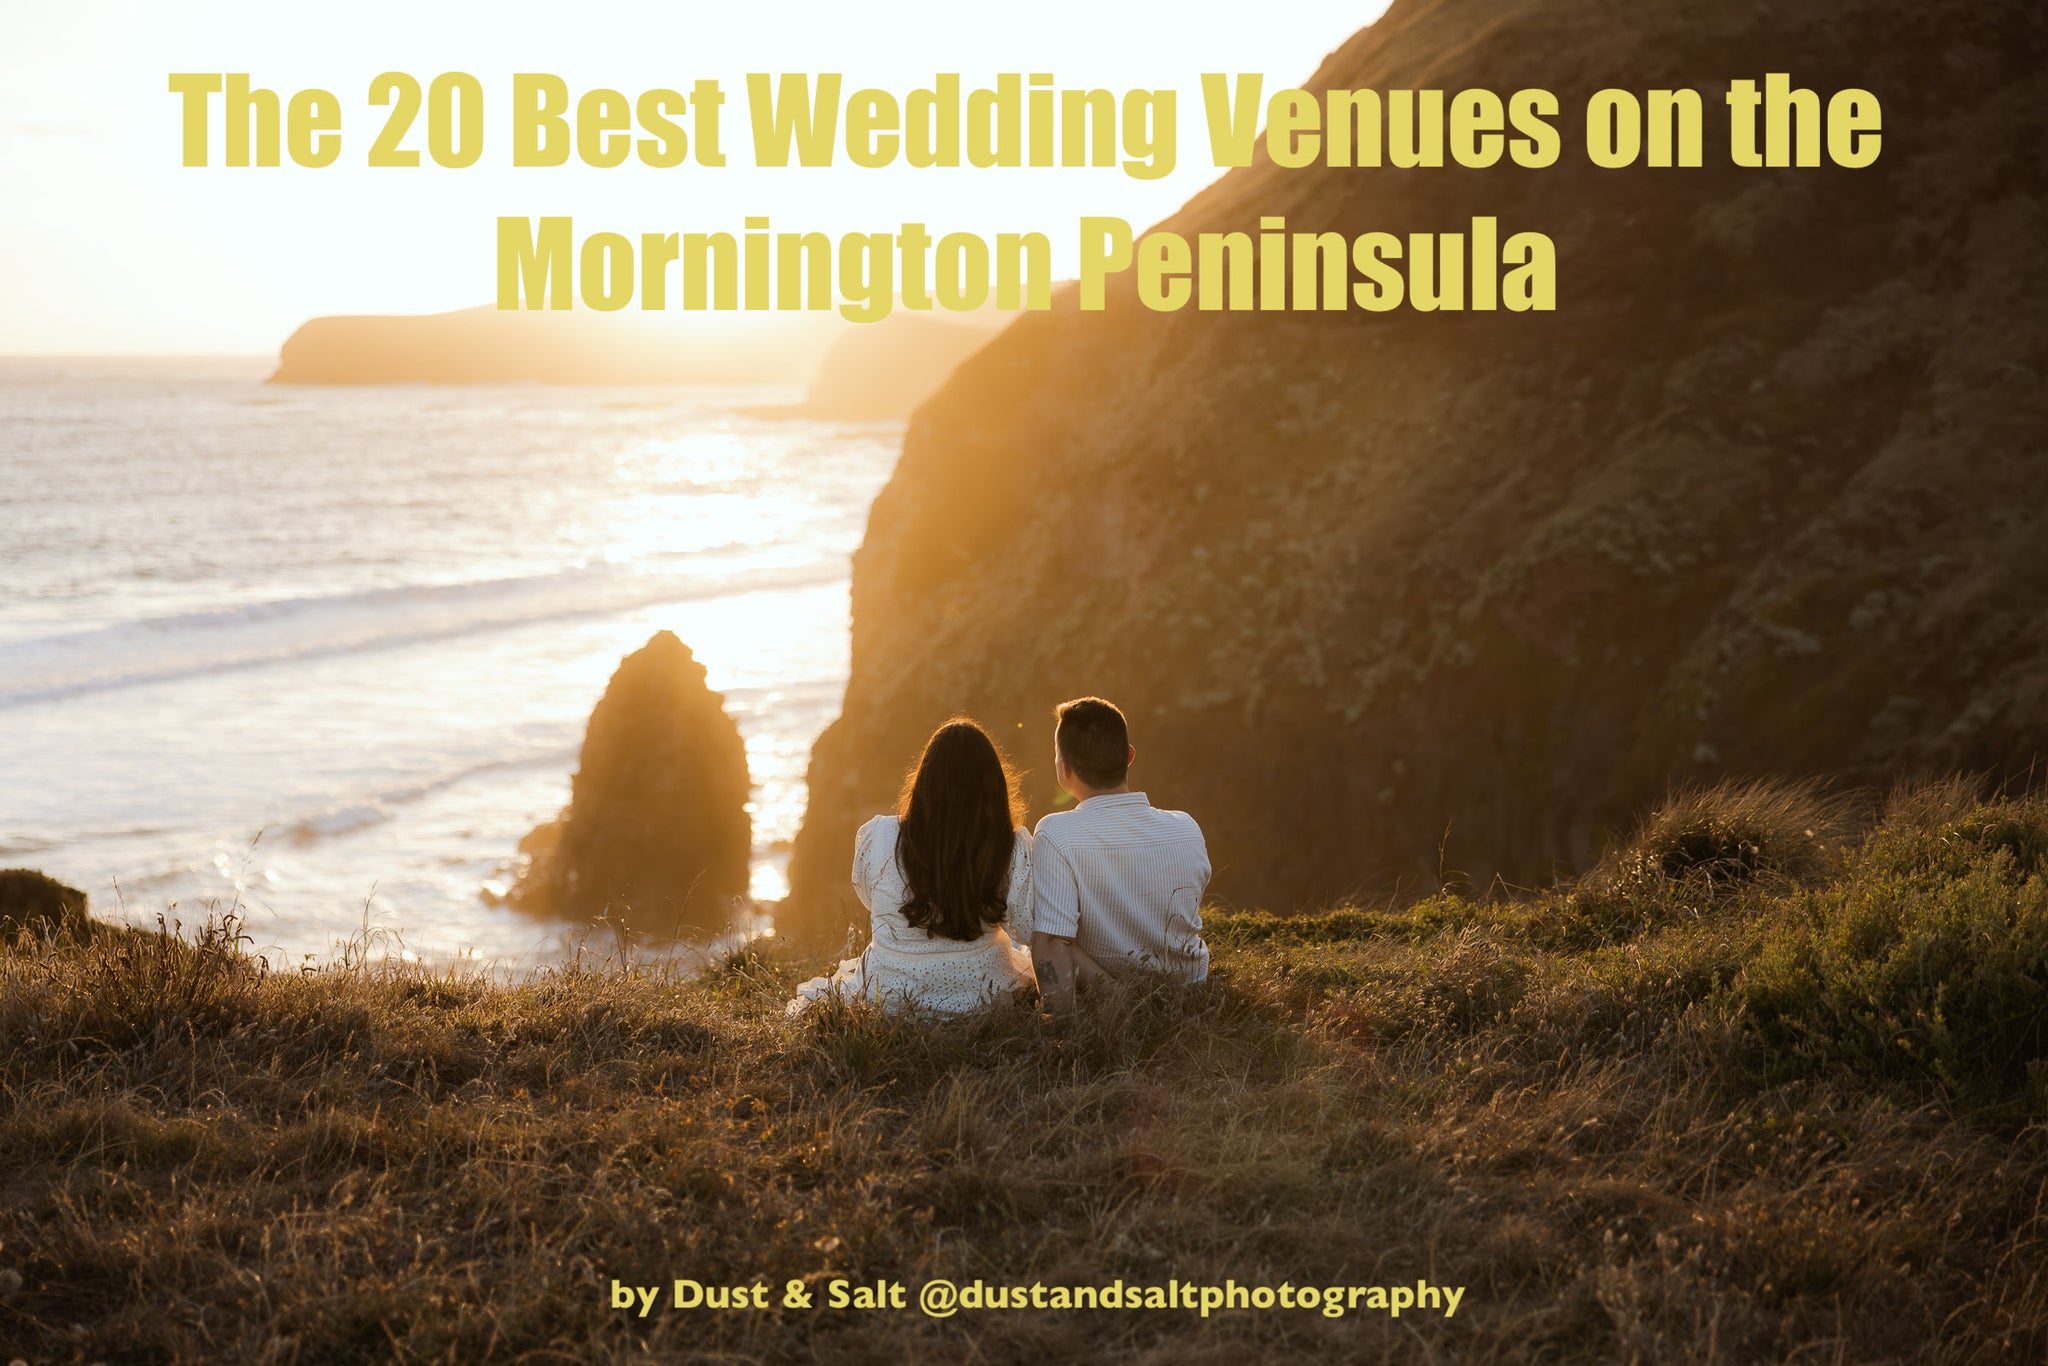 The 20 Best Wedding Venues on the Mornington Peninsula by Dust and Salt Photography